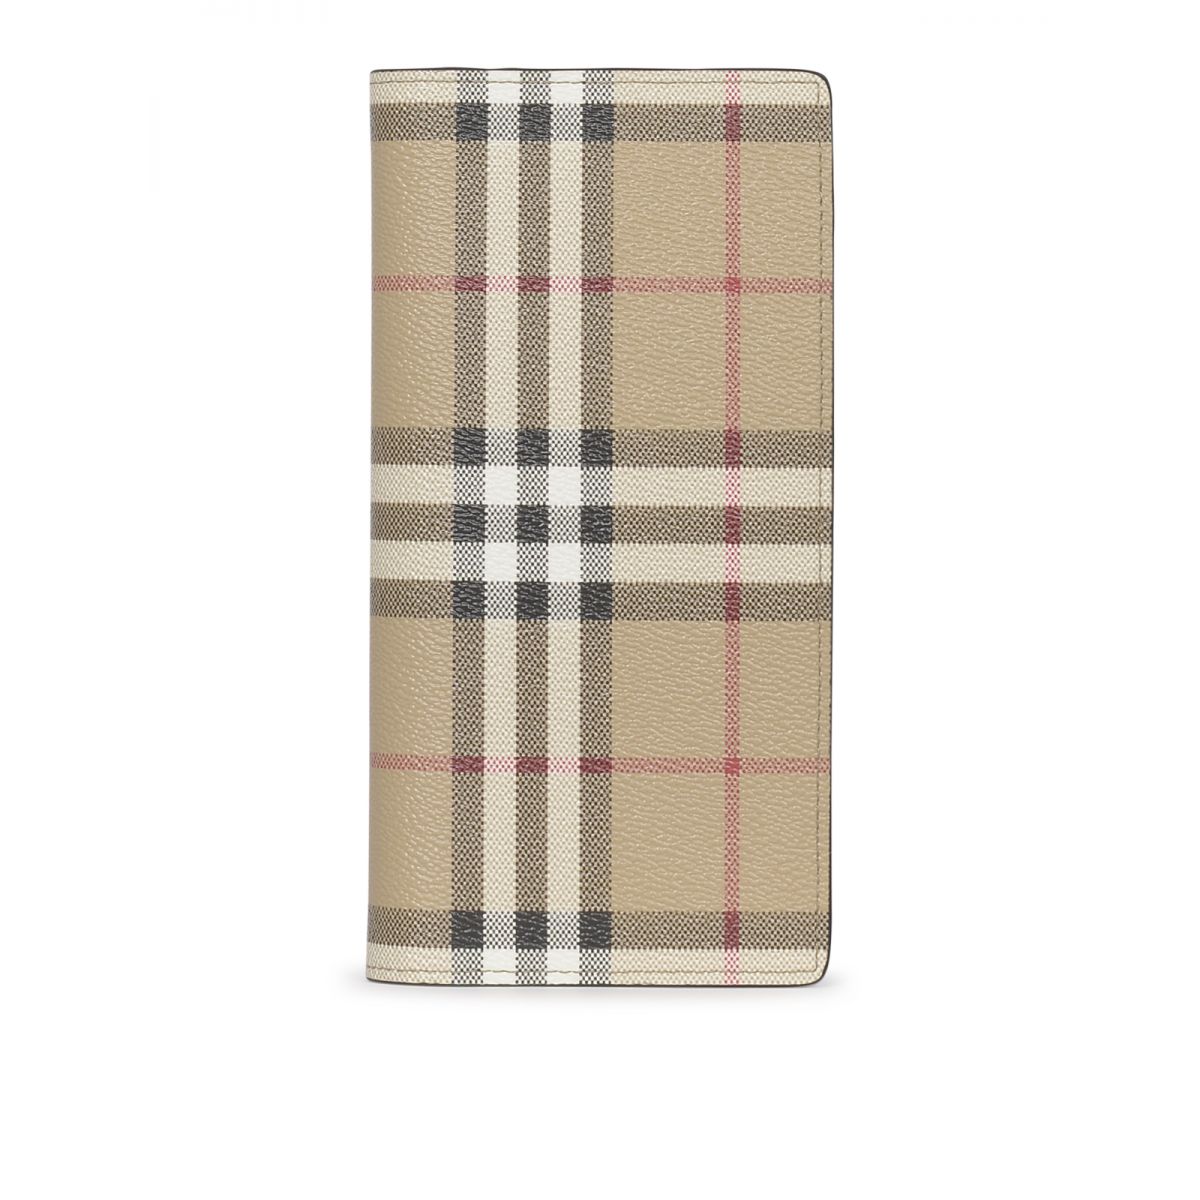 BURBERRY - Check-pattern long wallet